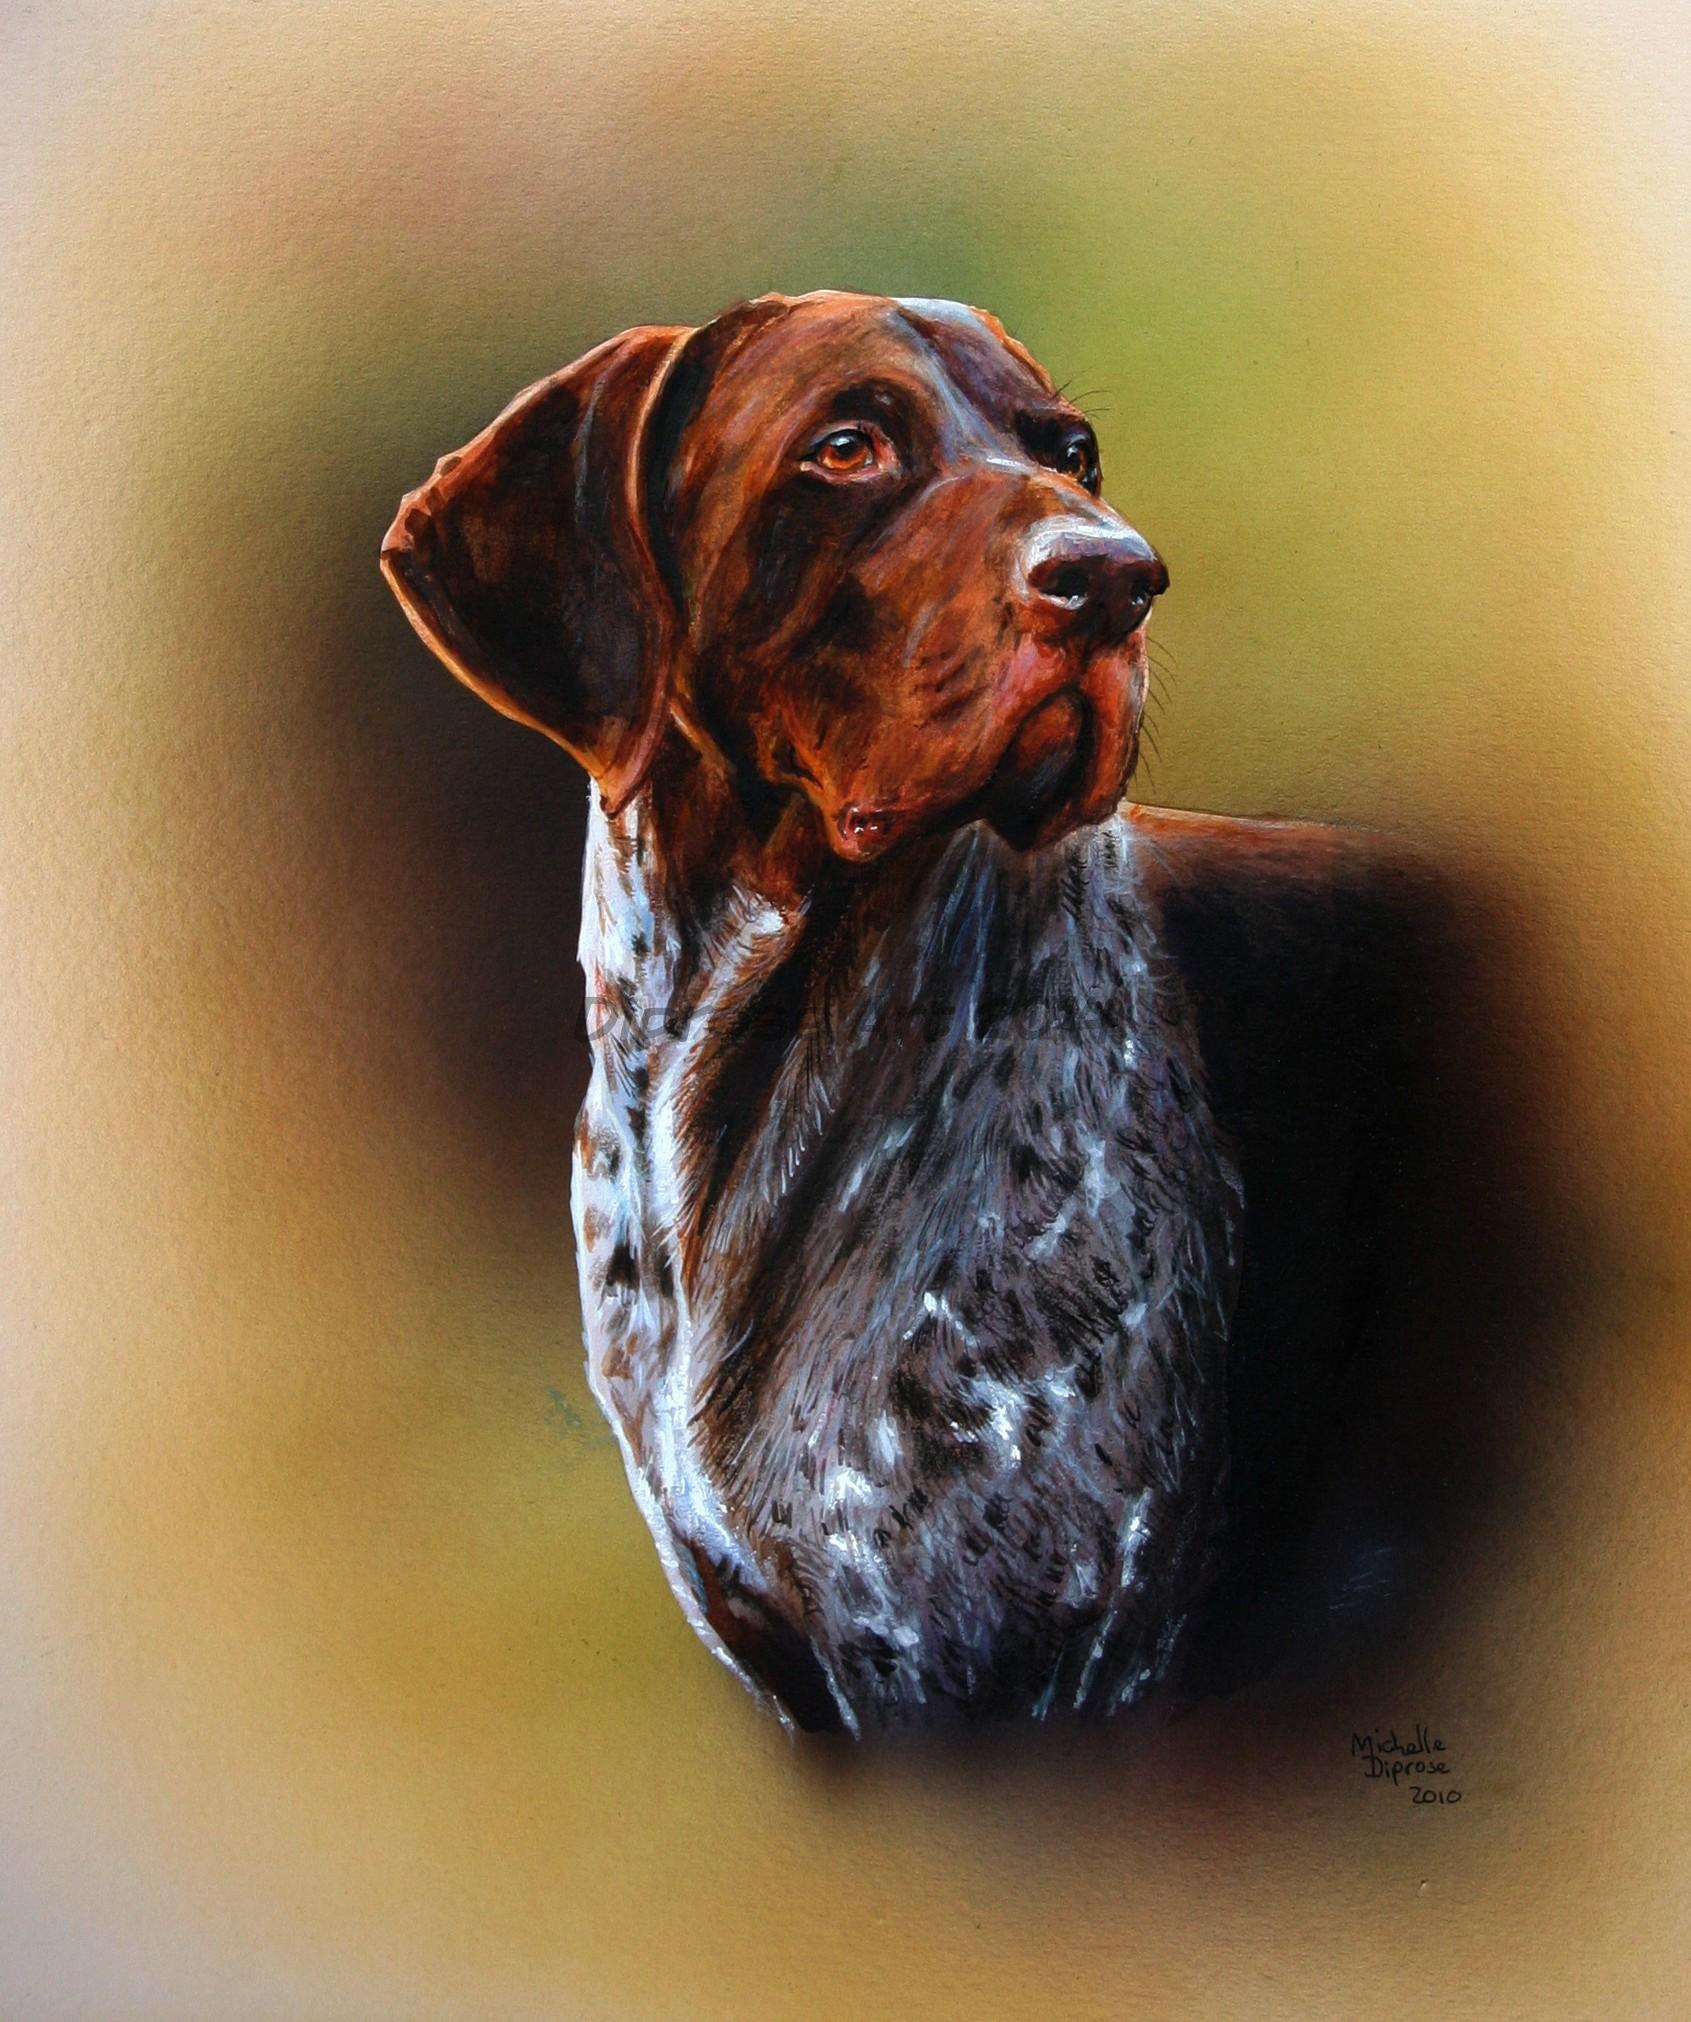 This is my own dog - my hero - acrylics on board - approx A3 - I use him as my logo because he is the love of my life